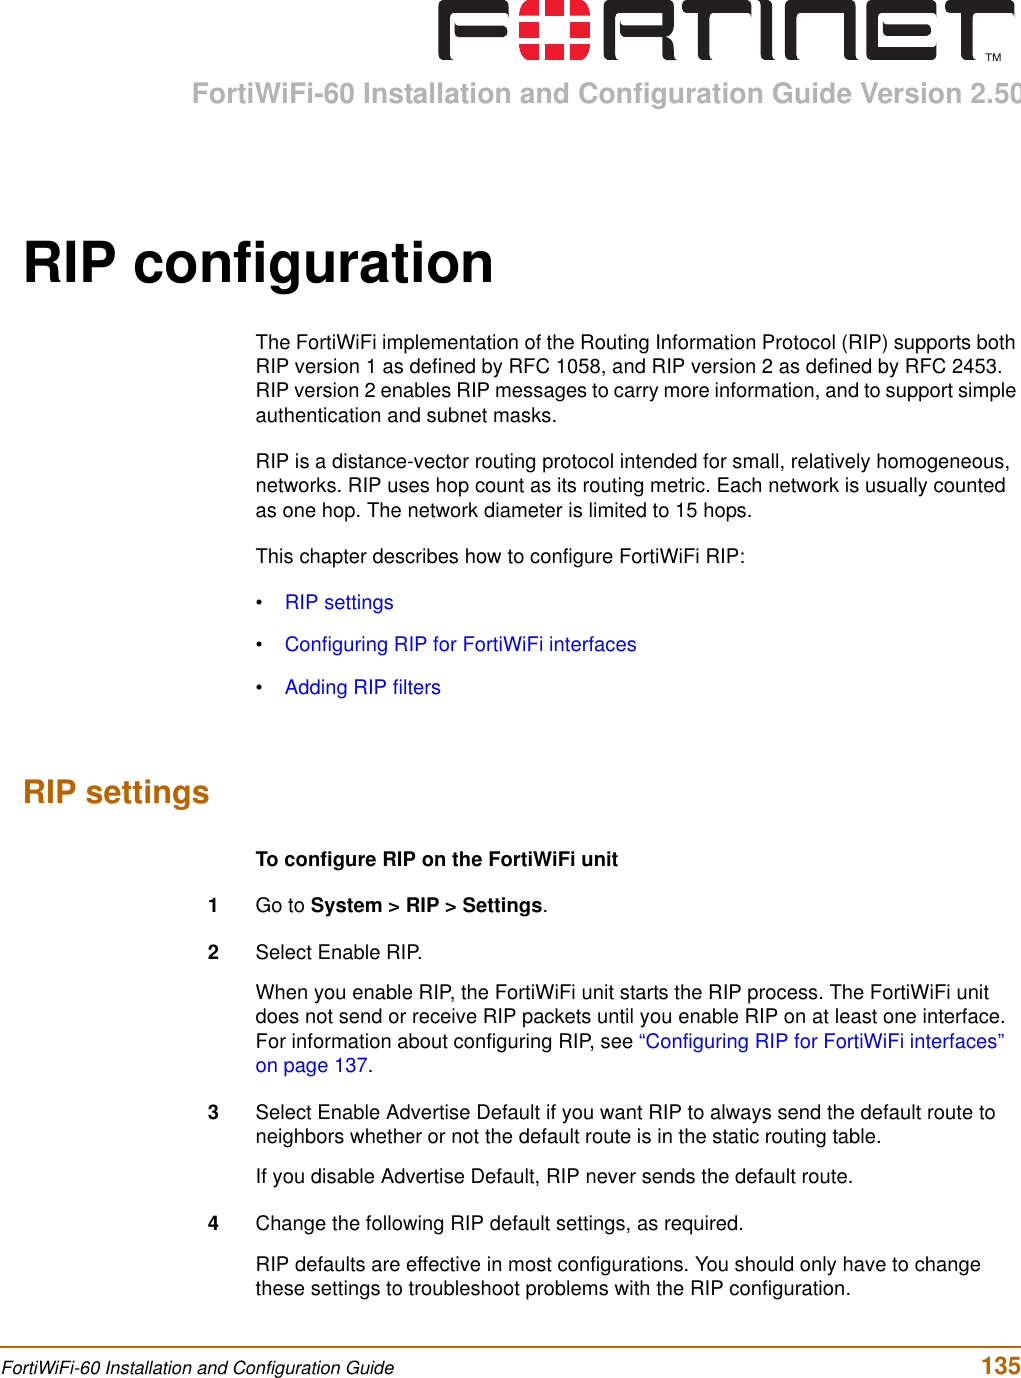 FortiWiFi-60 Installation and Configuration Guide Version 2.50FortiWiFi-60 Installation and Configuration Guide  135RIP configurationThe FortiWiFi implementation of the Routing Information Protocol (RIP) supports both RIP version 1 as defined by RFC 1058, and RIP version 2 as defined by RFC 2453. RIP version 2 enables RIP messages to carry more information, and to support simple authentication and subnet masks.RIP is a distance-vector routing protocol intended for small, relatively homogeneous, networks. RIP uses hop count as its routing metric. Each network is usually counted as one hop. The network diameter is limited to 15 hops.This chapter describes how to configure FortiWiFi RIP:•RIP settings•Configuring RIP for FortiWiFi interfaces•Adding RIP filtersRIP settingsTo configure RIP on the FortiWiFi unit1Go to System &gt; RIP &gt; Settings.2Select Enable RIP.When you enable RIP, the FortiWiFi unit starts the RIP process. The FortiWiFi unit does not send or receive RIP packets until you enable RIP on at least one interface. For information about configuring RIP, see “Configuring RIP for FortiWiFi interfaces” on page 137.3Select Enable Advertise Default if you want RIP to always send the default route to neighbors whether or not the default route is in the static routing table.If you disable Advertise Default, RIP never sends the default route. 4Change the following RIP default settings, as required.RIP defaults are effective in most configurations. You should only have to change these settings to troubleshoot problems with the RIP configuration.